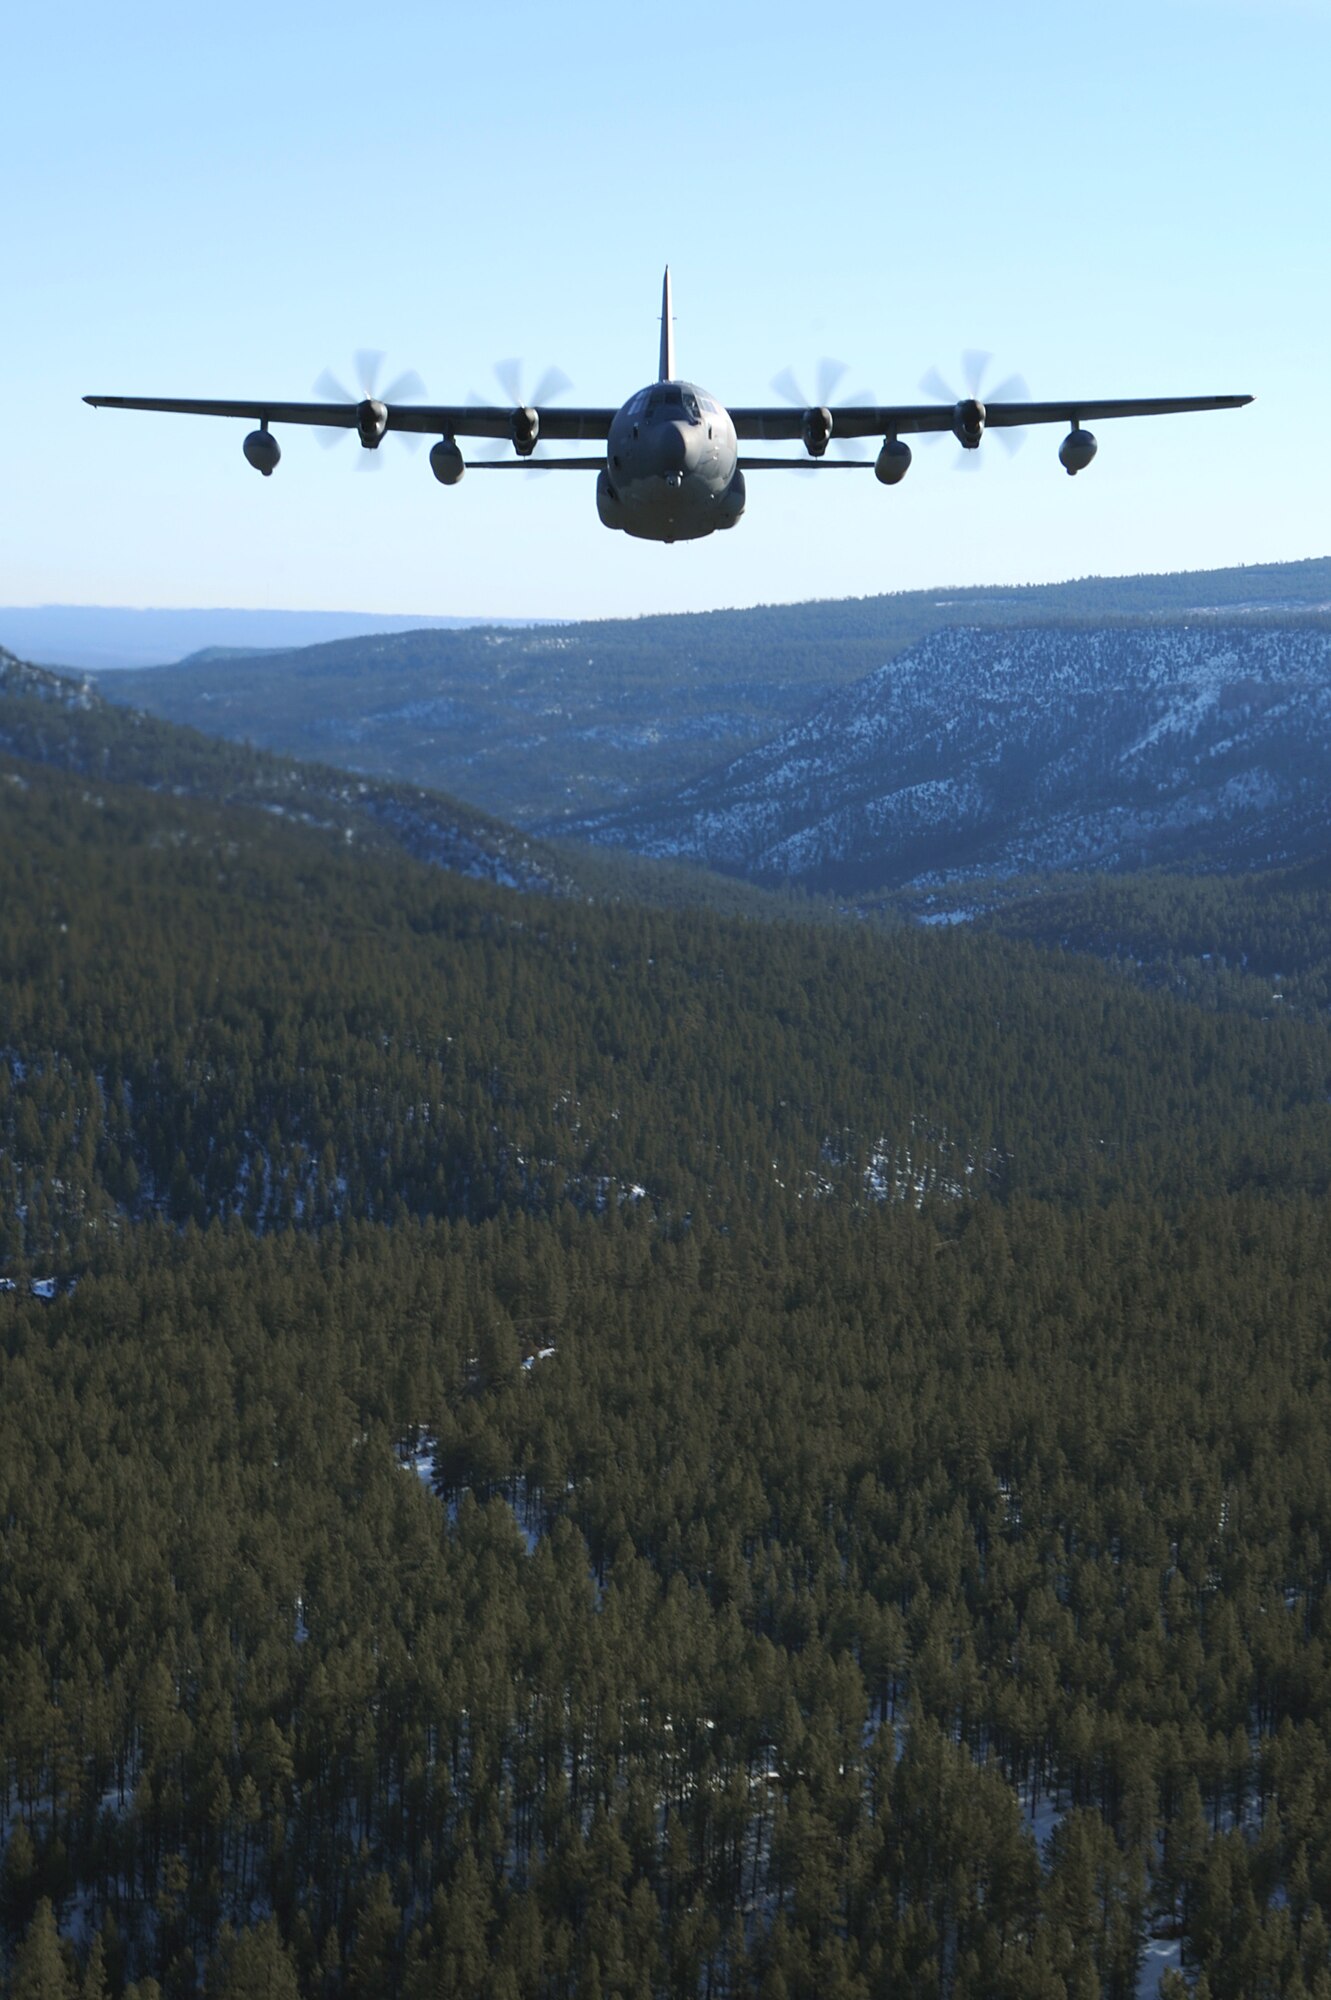 A 522nd Special Operations Squadron MC-130J Commando II aircraft, flies over the skies of New Mexico, Jan. 4, 2012.  The 522 SOS is stationed at Cannon Air Force Base, N.M. and the MC-130J provides in-flight refueling, infiltration/exfiltration and aerial delivery resupply of special operations forces.  (U.S. Air Force photo by Senior Airman James Bell)